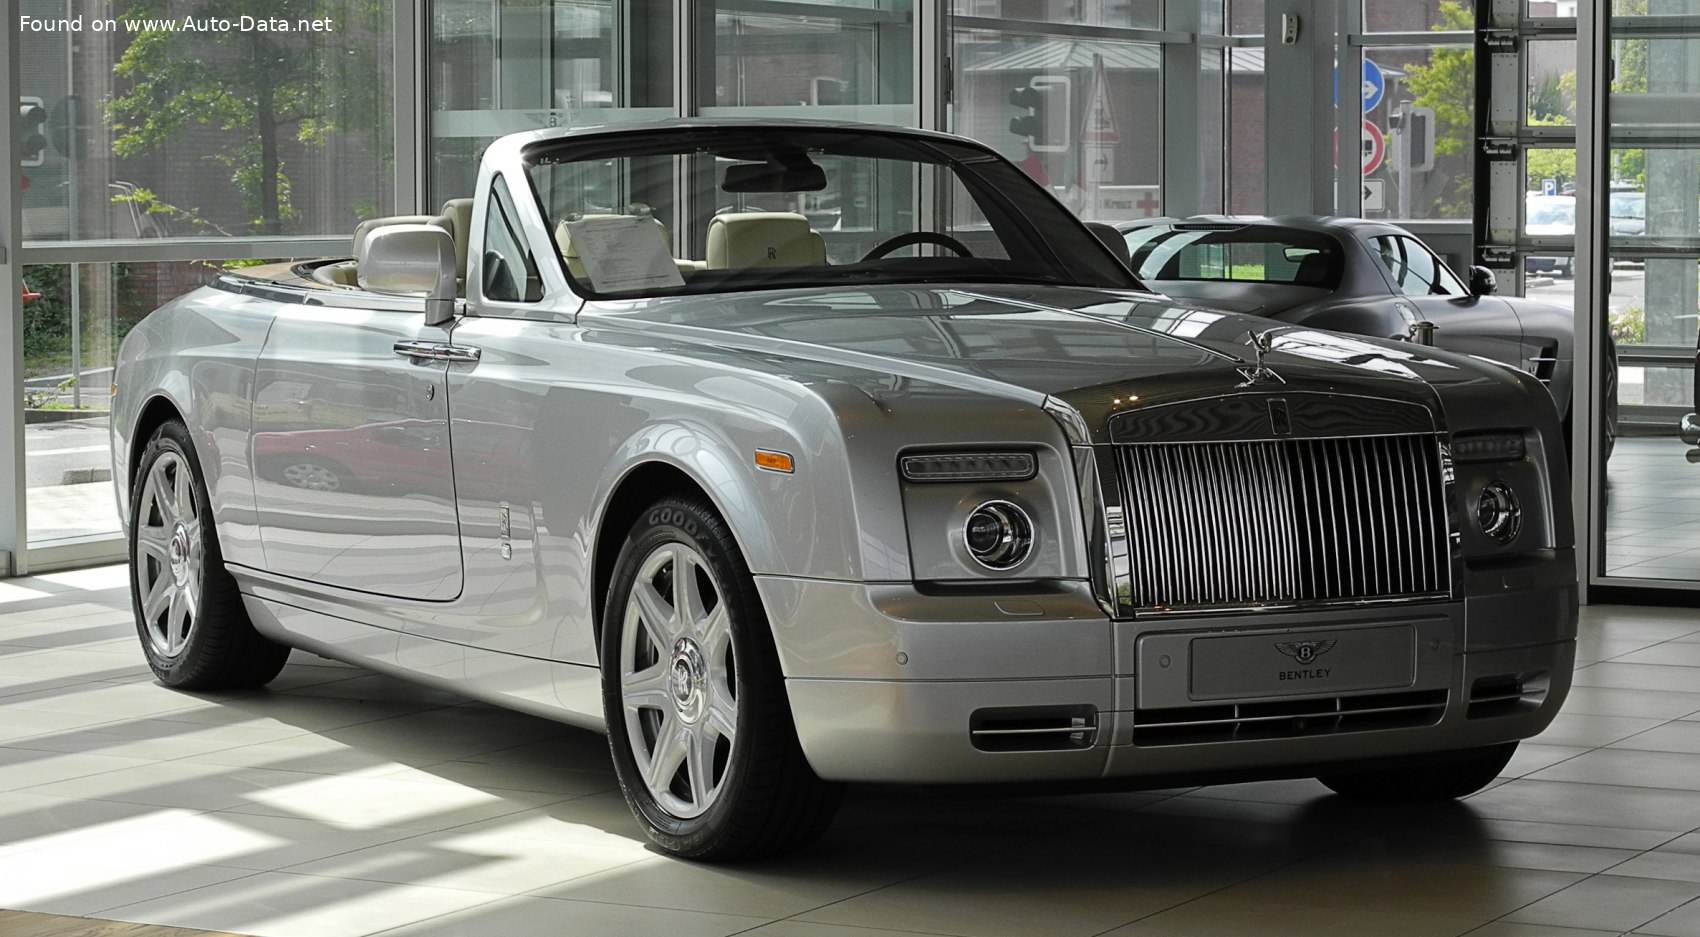 2011 RollsRoyce Phantom Drophead Coupe Convertible Latest Prices  Reviews Specs Photos and Incentives  Autoblog